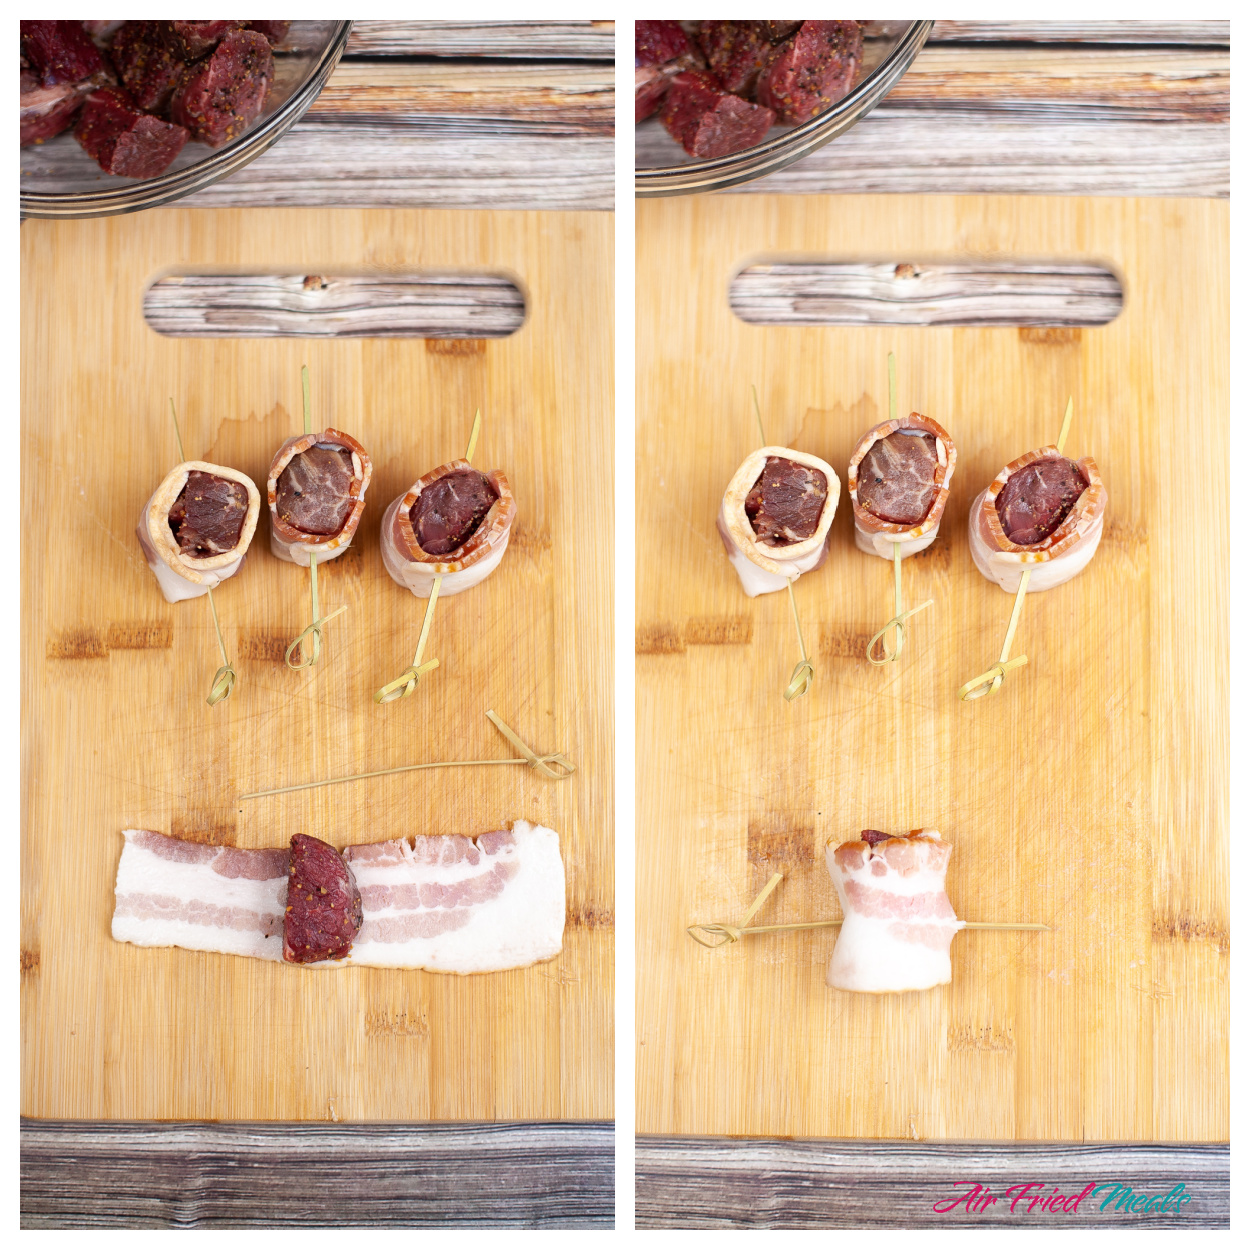 Collage - left has steak over a slice of bacon, right has bacon rolled up around steak and pinned with toothpick.